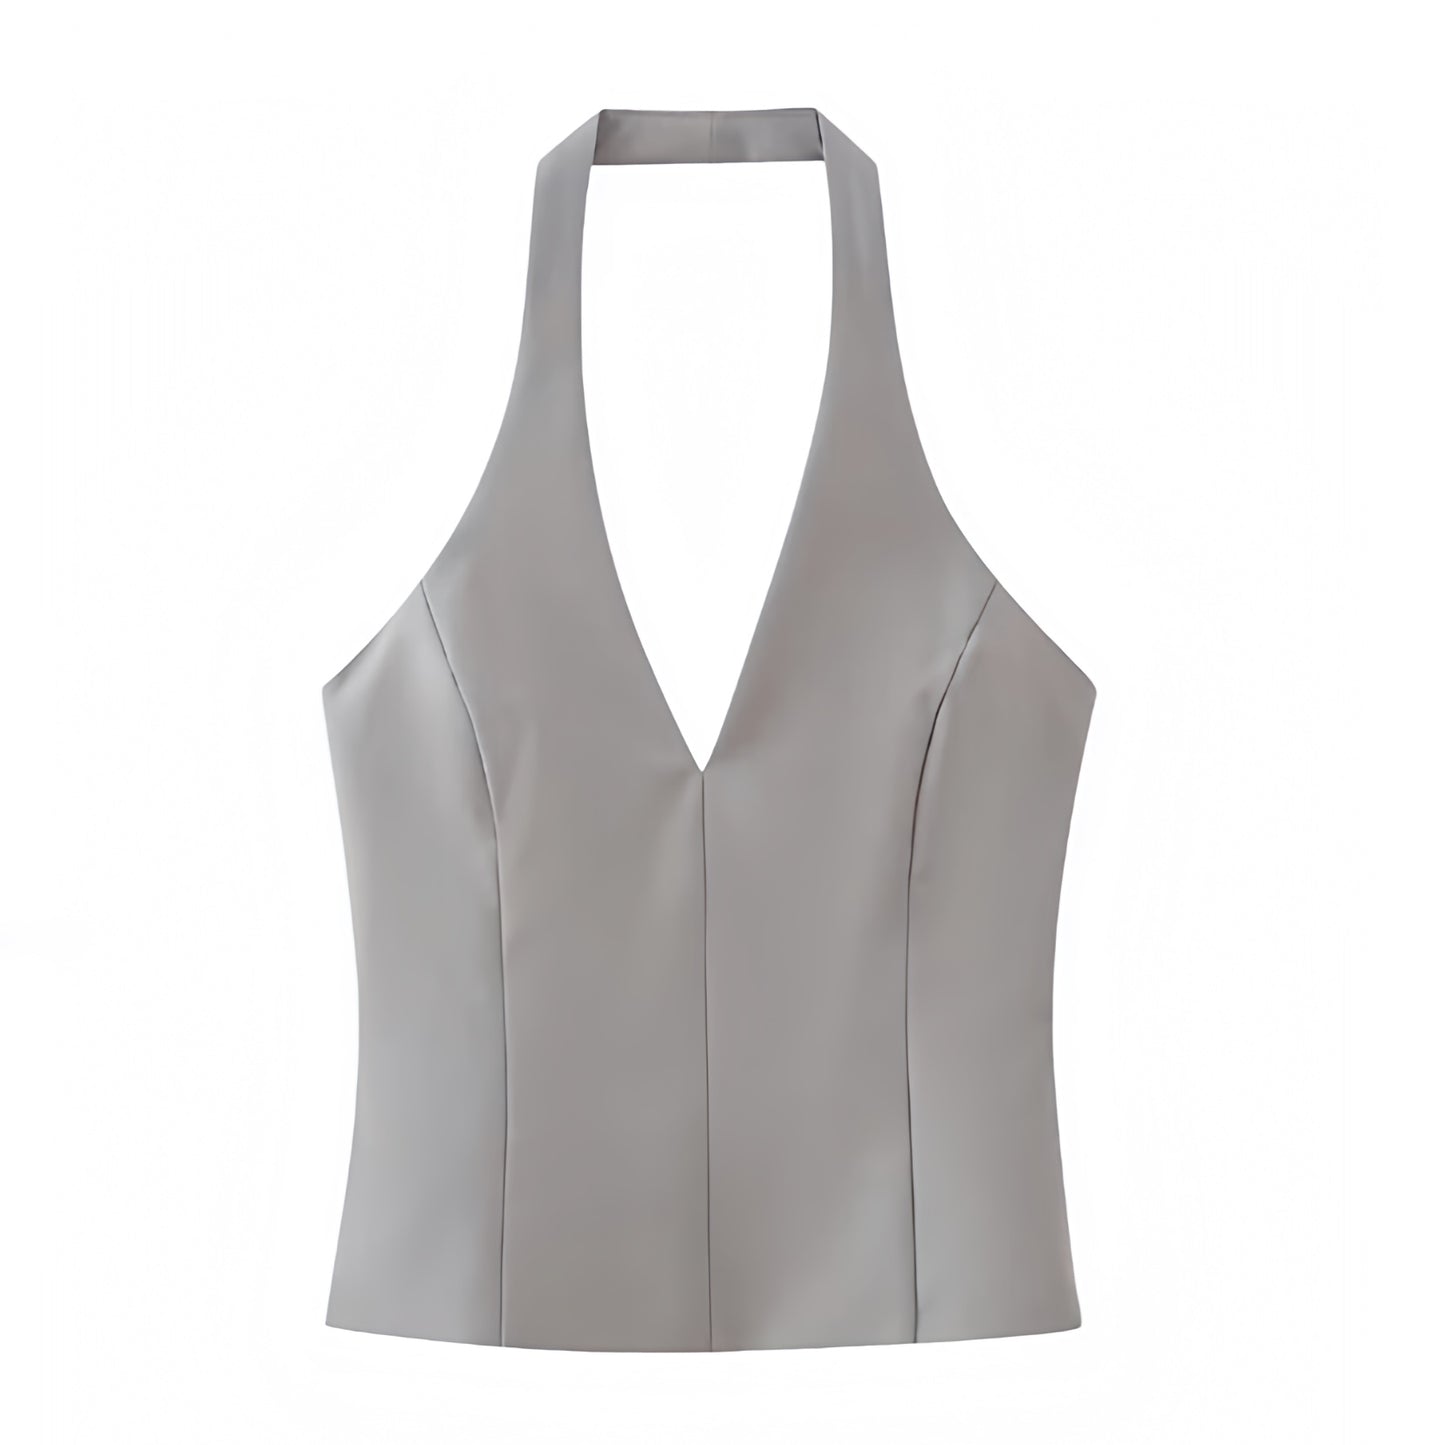 light-grey-gray-silver-bodycon-corset-pleated-v-neck-slim-fit-sleeveless-backless-open-back-cut-out-halter-crop-camisole-tank-top-blouse-women-ladies-chic-trendy-spring-2024-summer-elegant-casual-semi-formal-classy-feminine-party-date-night-out-sexy-club-wear-y2k-90s-minimalist-office-siren-style-zara-revolve-aritzia-white-fox-princess-polly-babyboo-iamgia-edikted-fenity